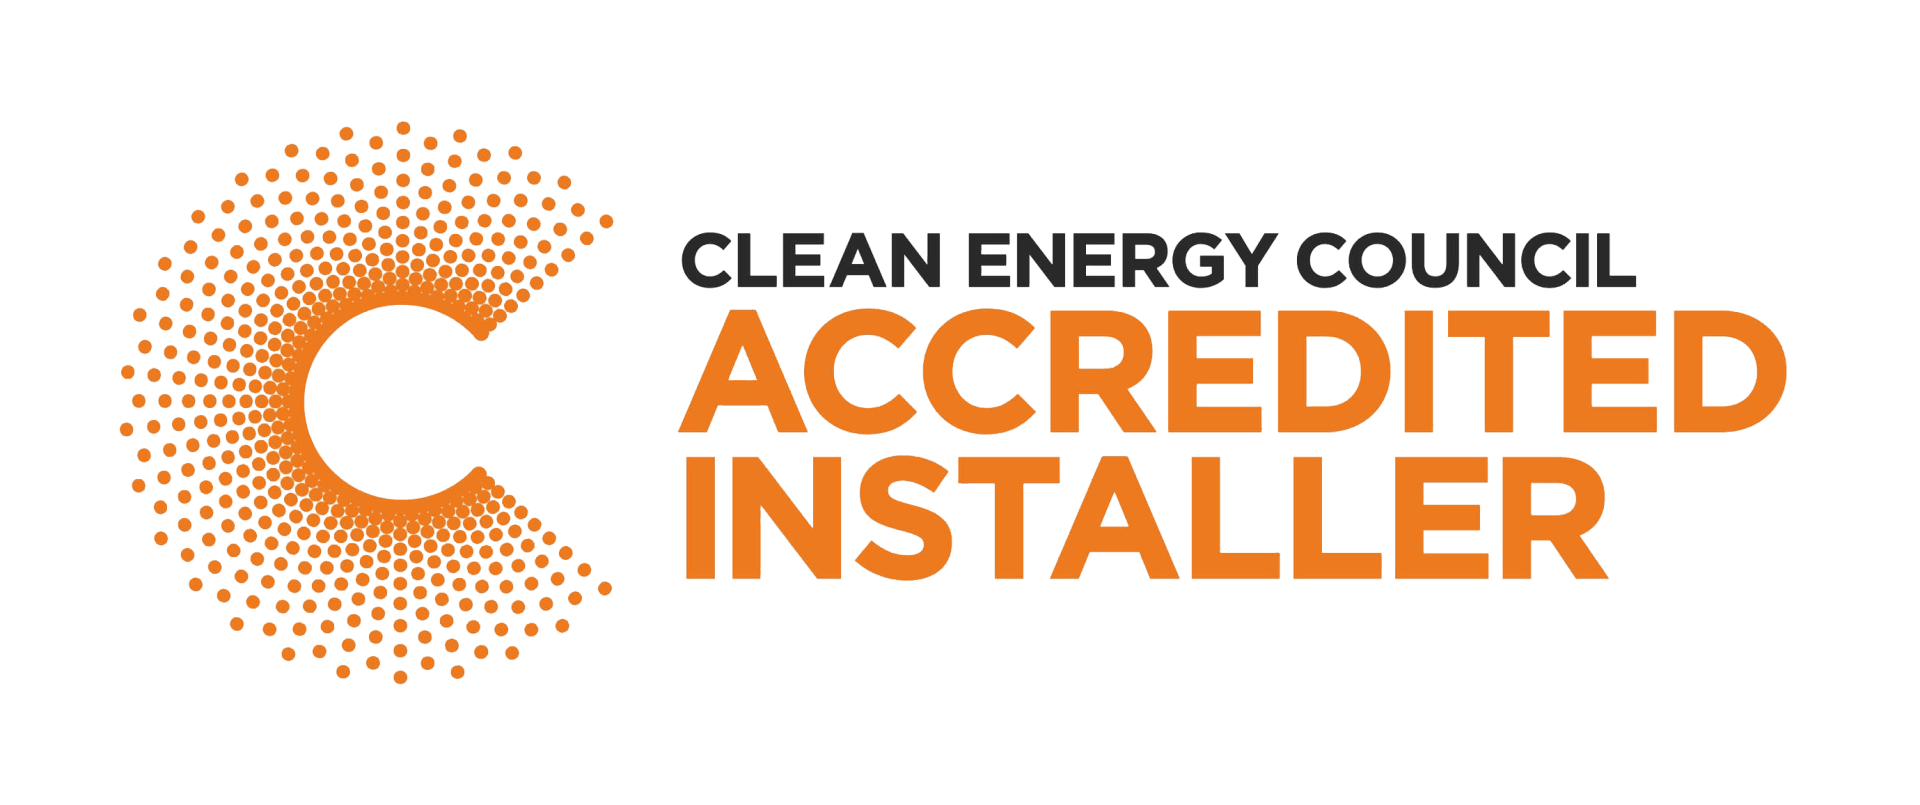 Clean Energy Council accredited